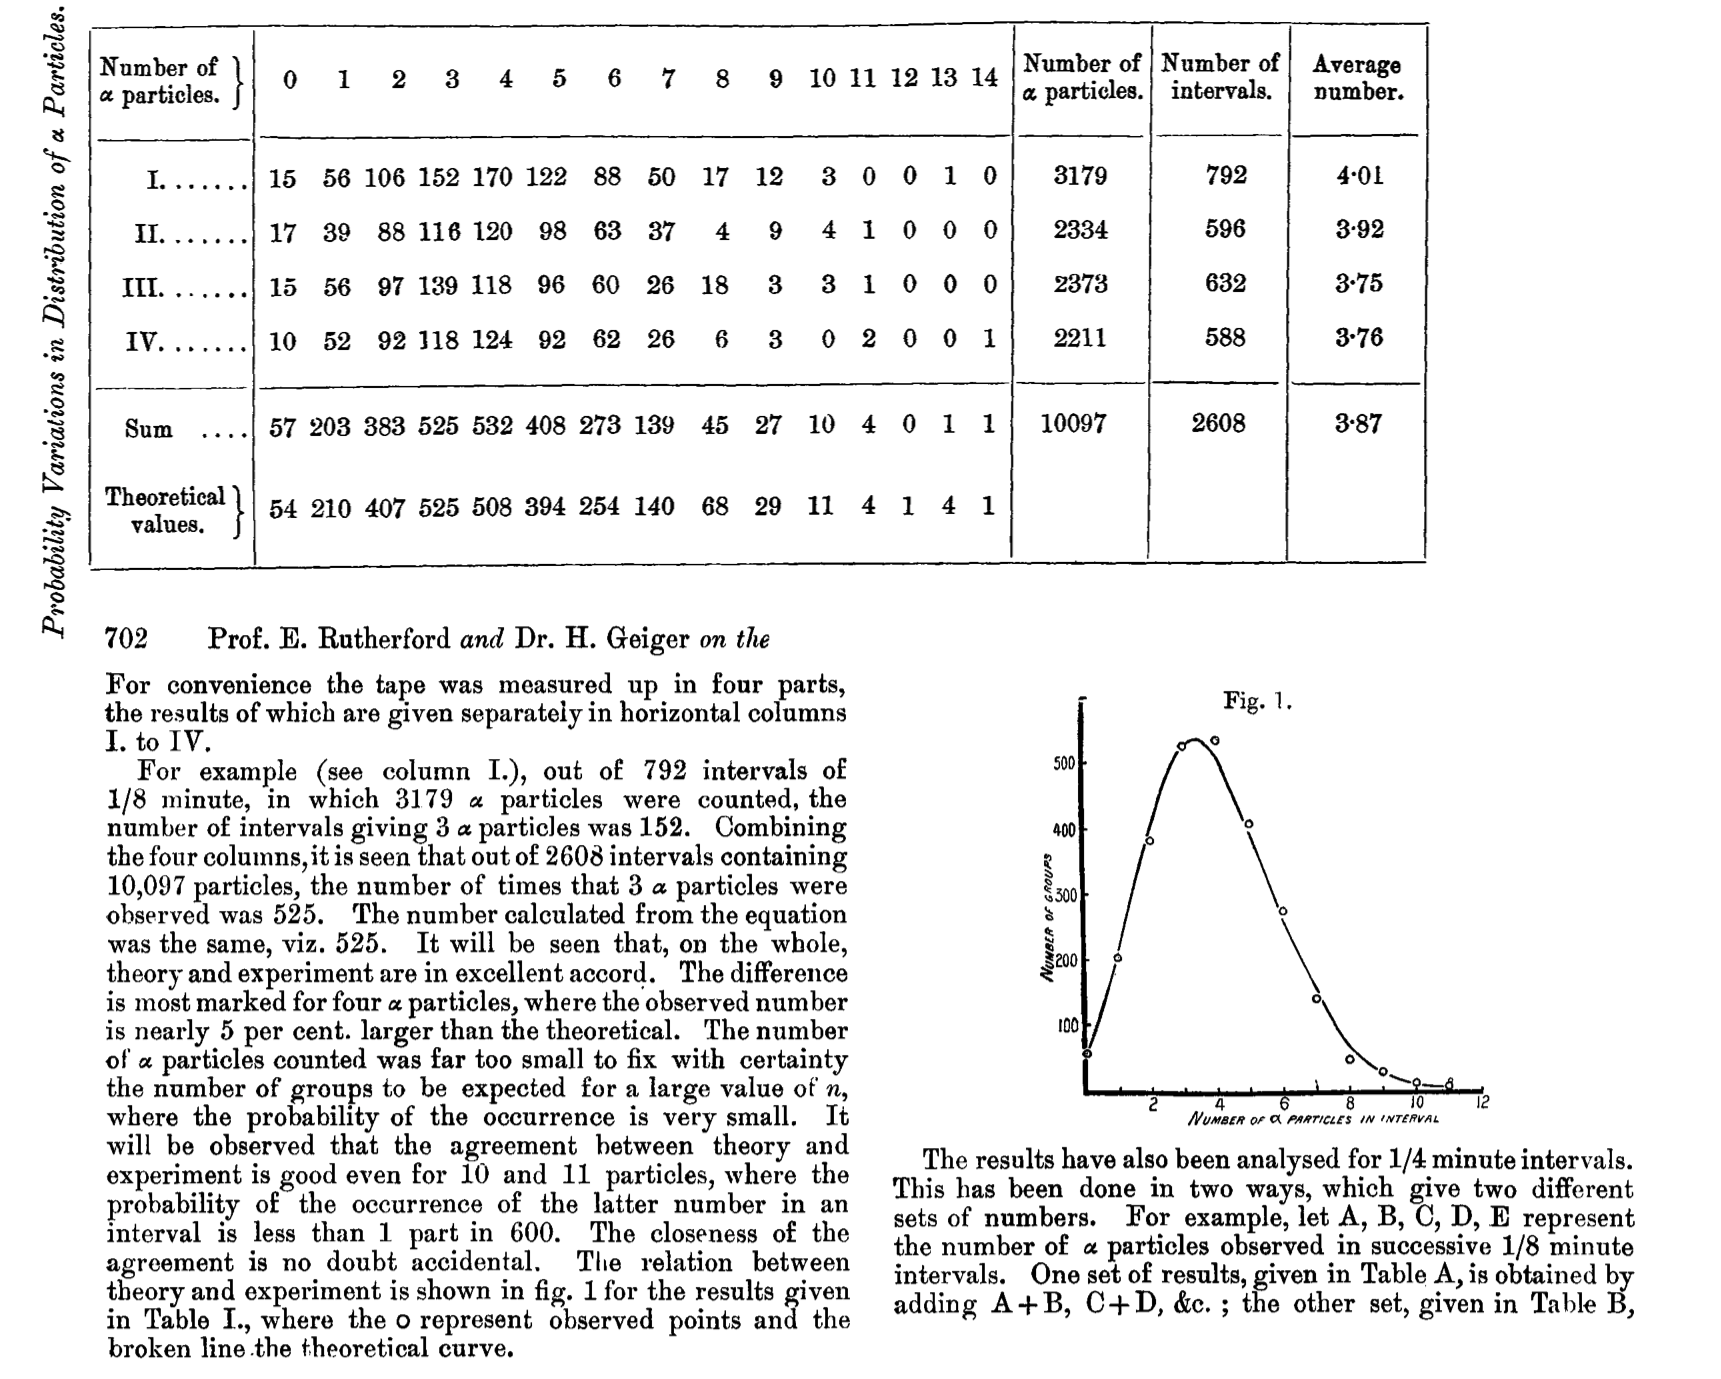 Table and Figure from Rutherford, Geiger and Bateman, 1910.